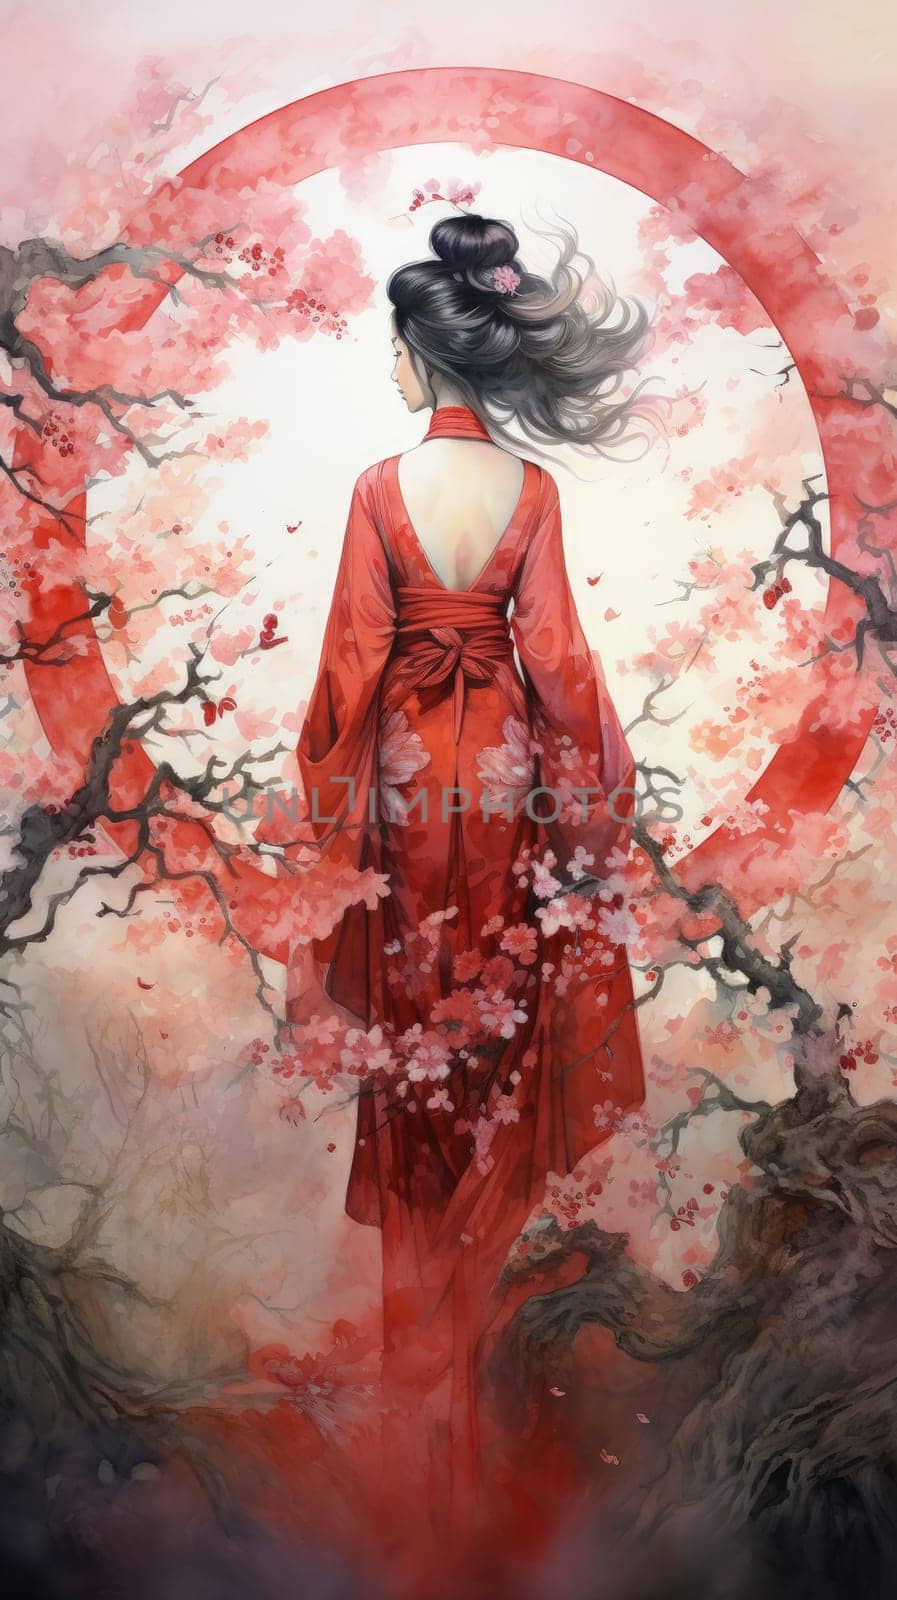 A geisha adorned in vibrant red kimono, bathed in the warm hues of a celestial redshift by Kadula